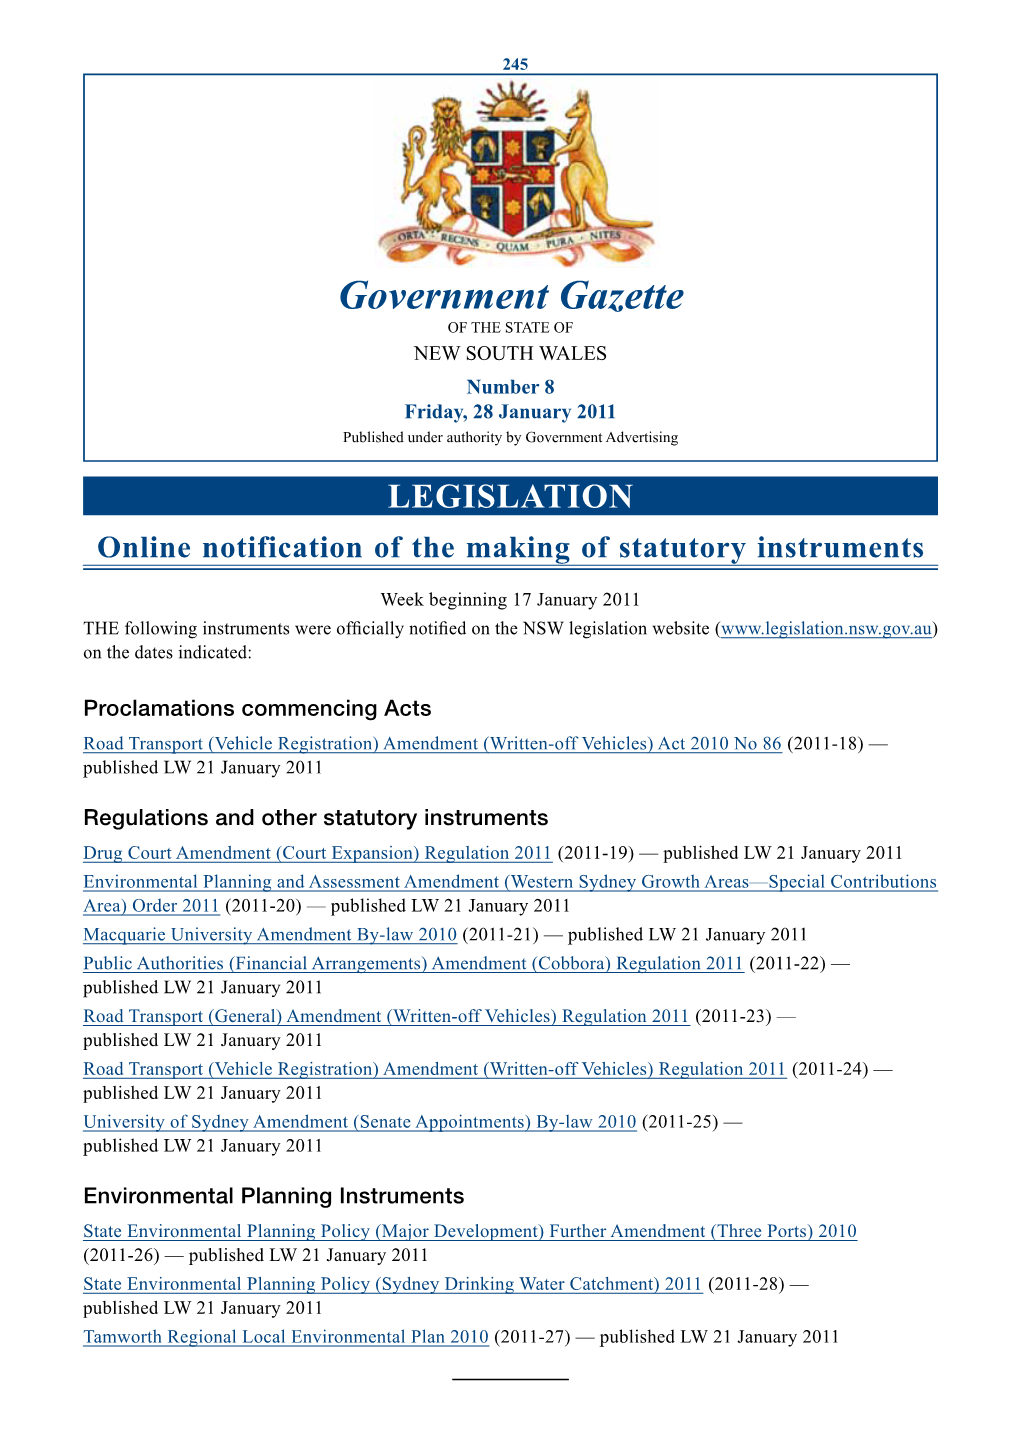 Government Gazette of 28 January 2011.Indd